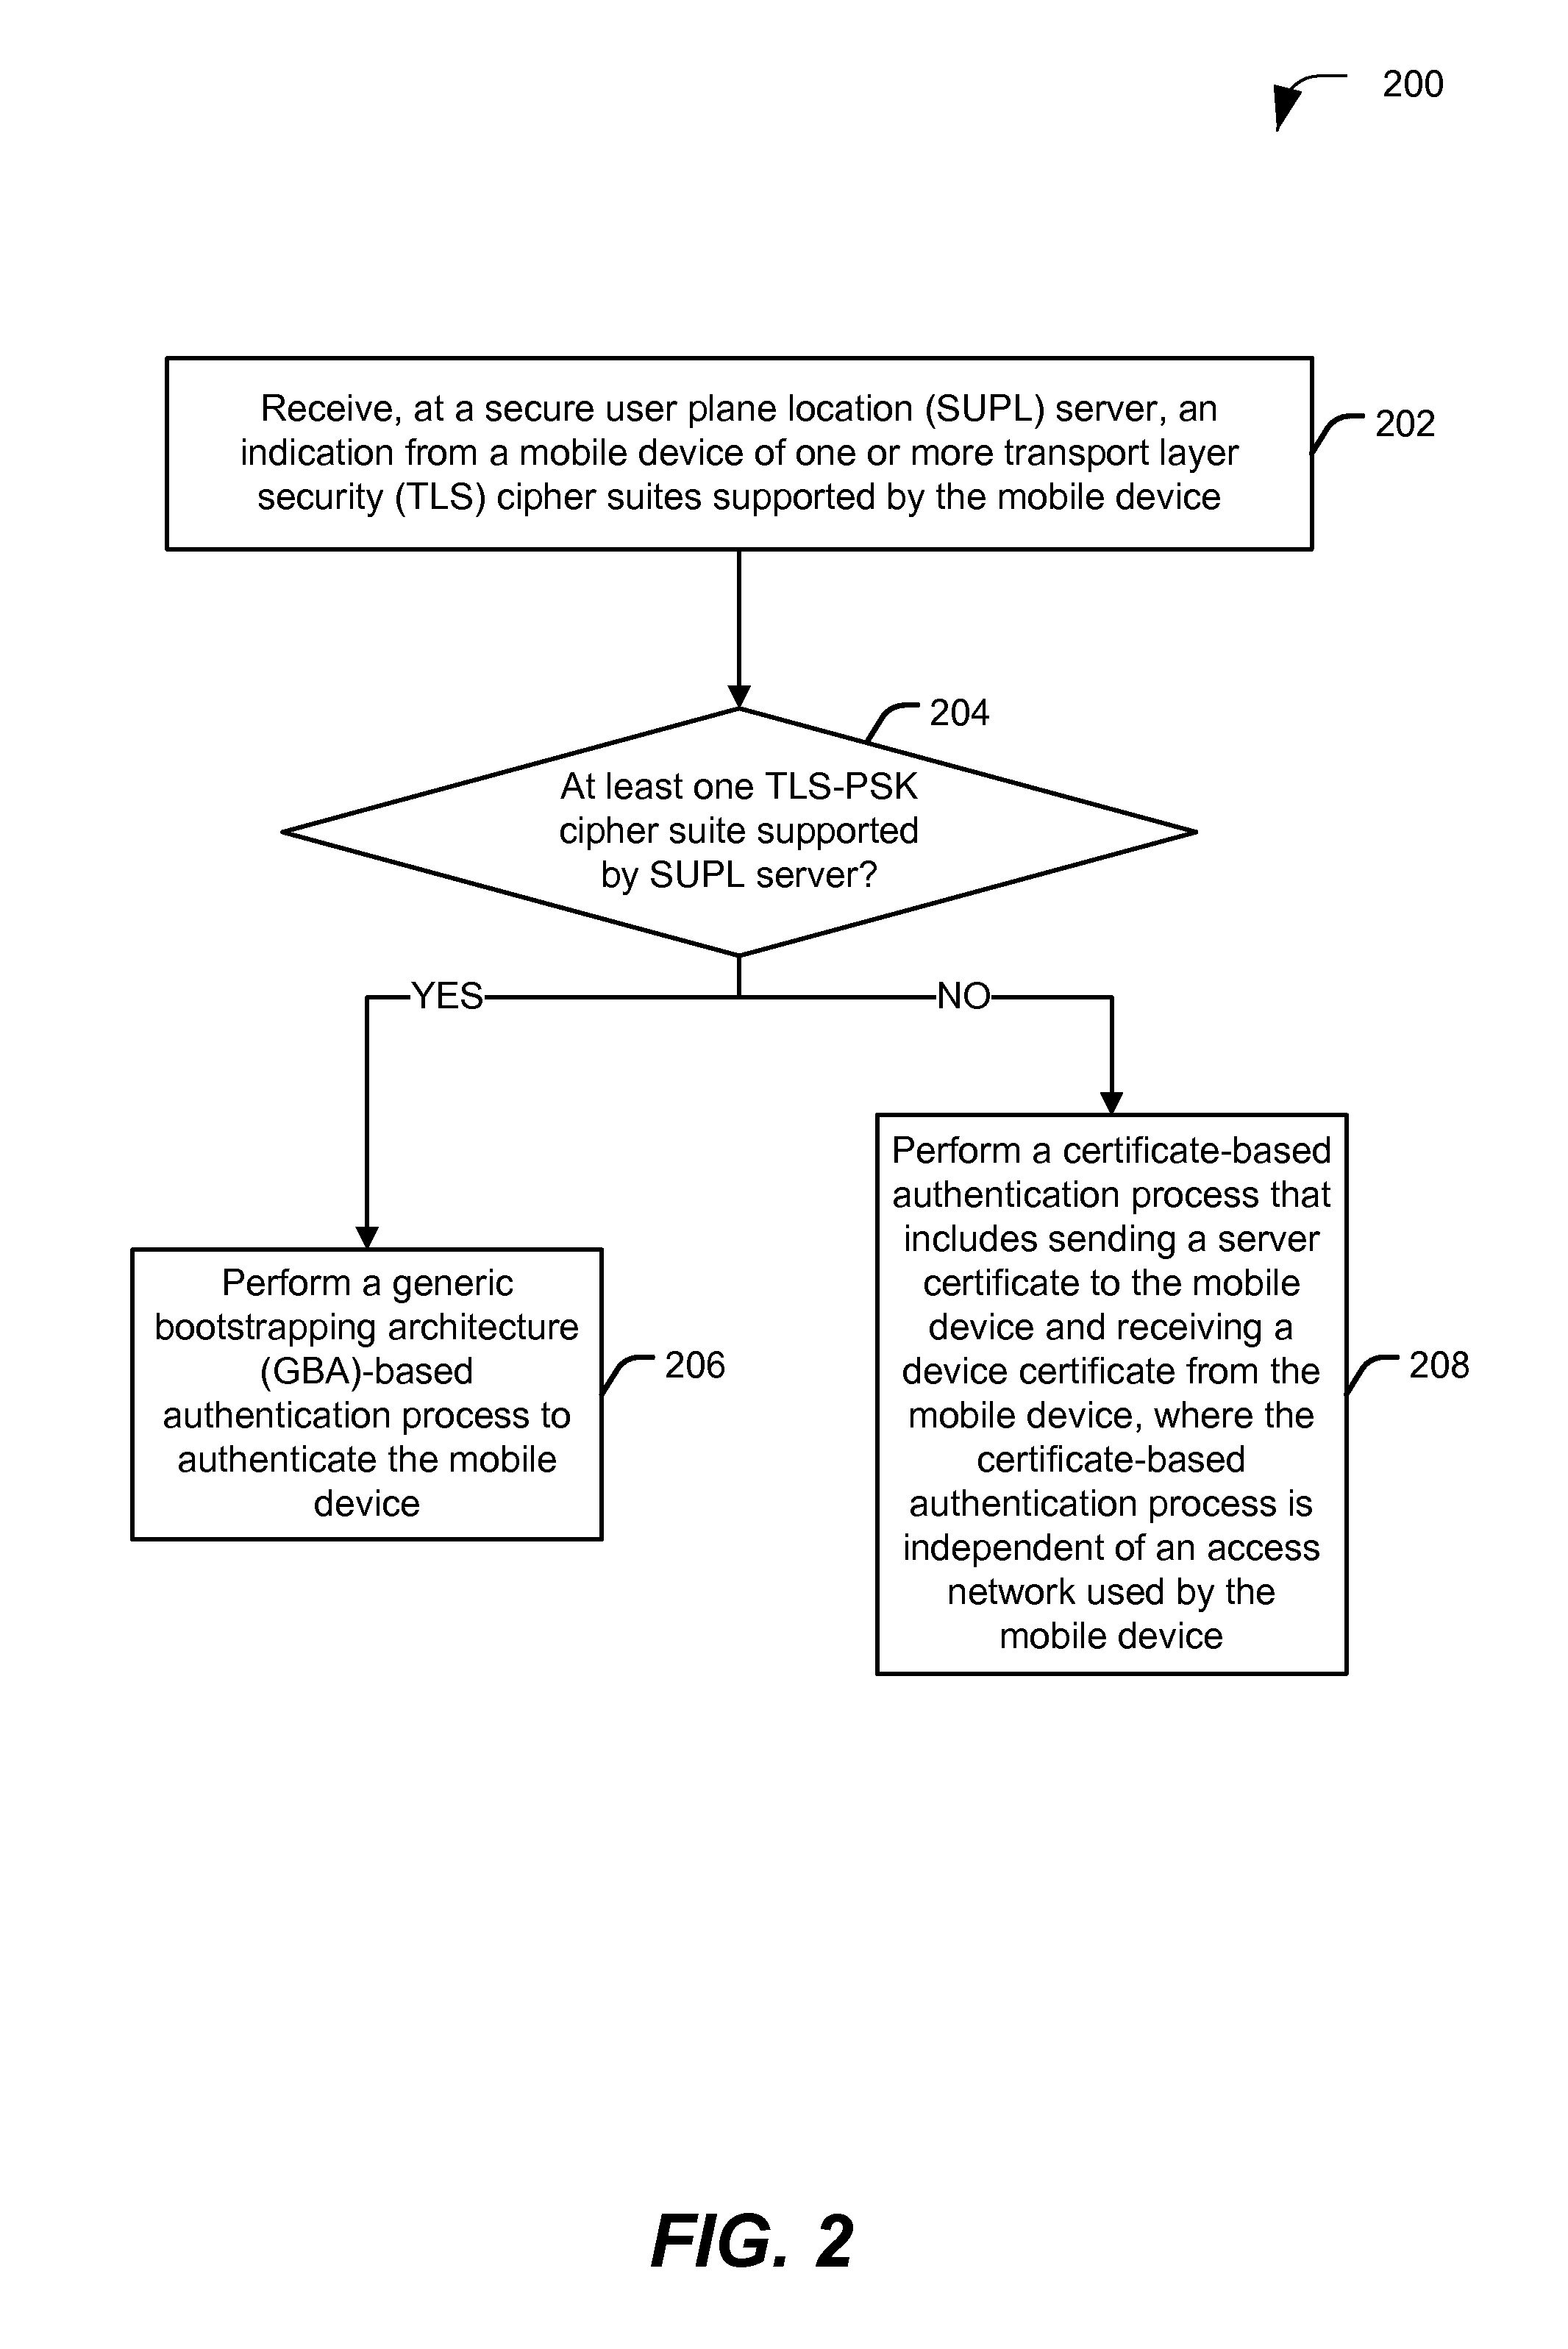 Authentication in secure user plane location (SUPL) systems